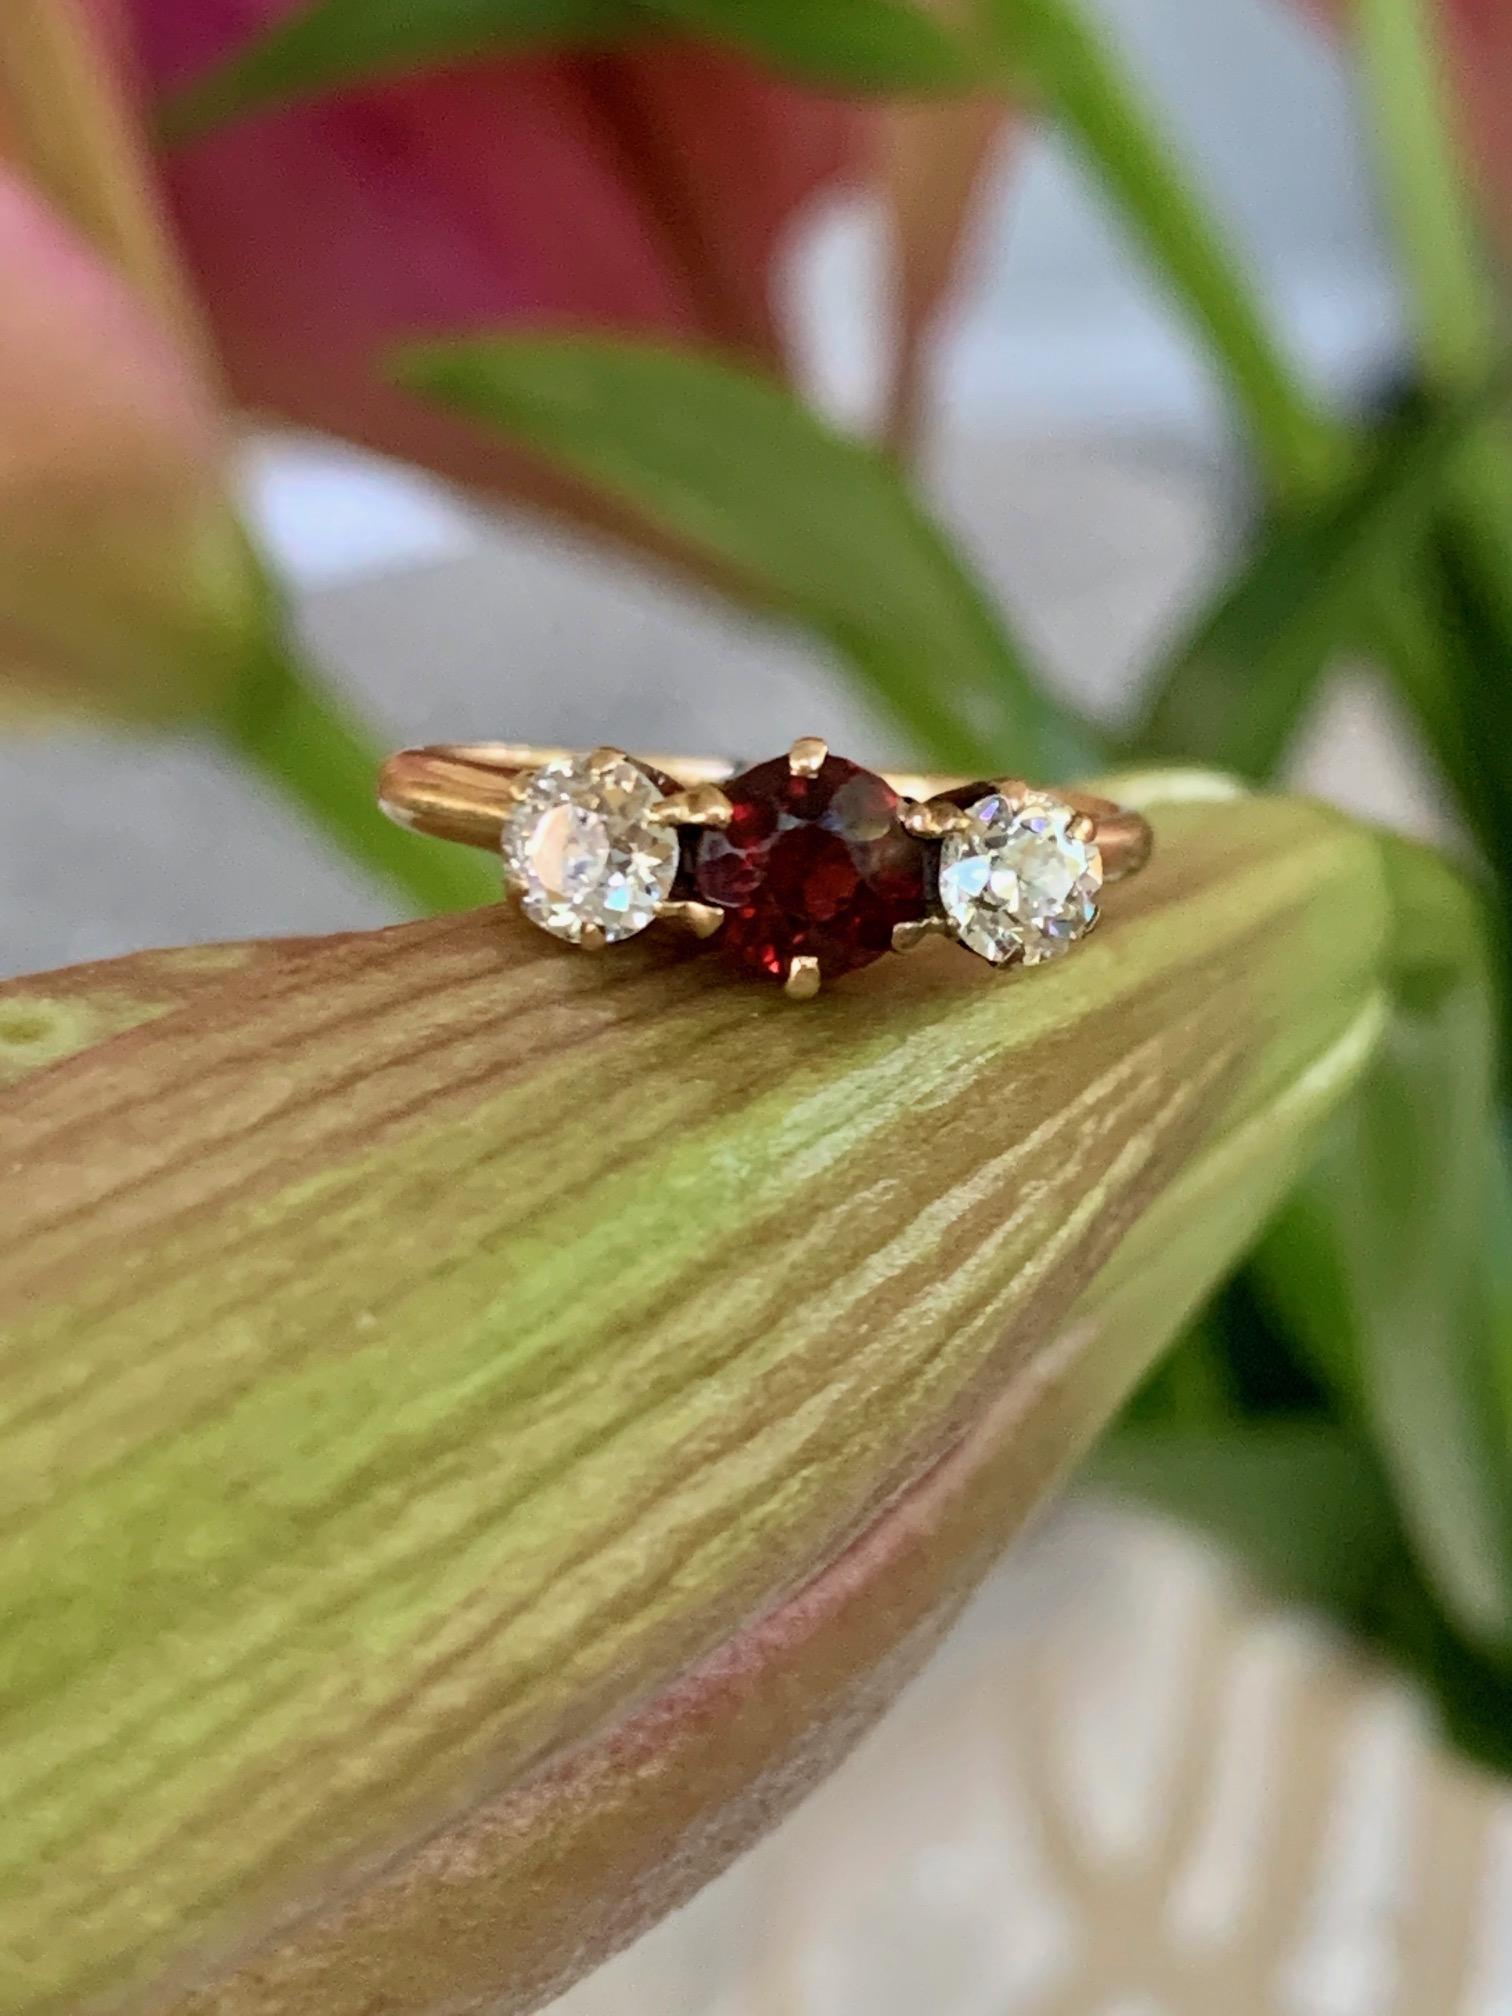 A beautiful Vintage 14k gold ring with large center faceted Garnet stone supported by two Old European cut diamonds.  All stones are prong set

From the C.D. Peacock company.

Size 6 1/2 - this ring is resizable but vendor does not offer sizing